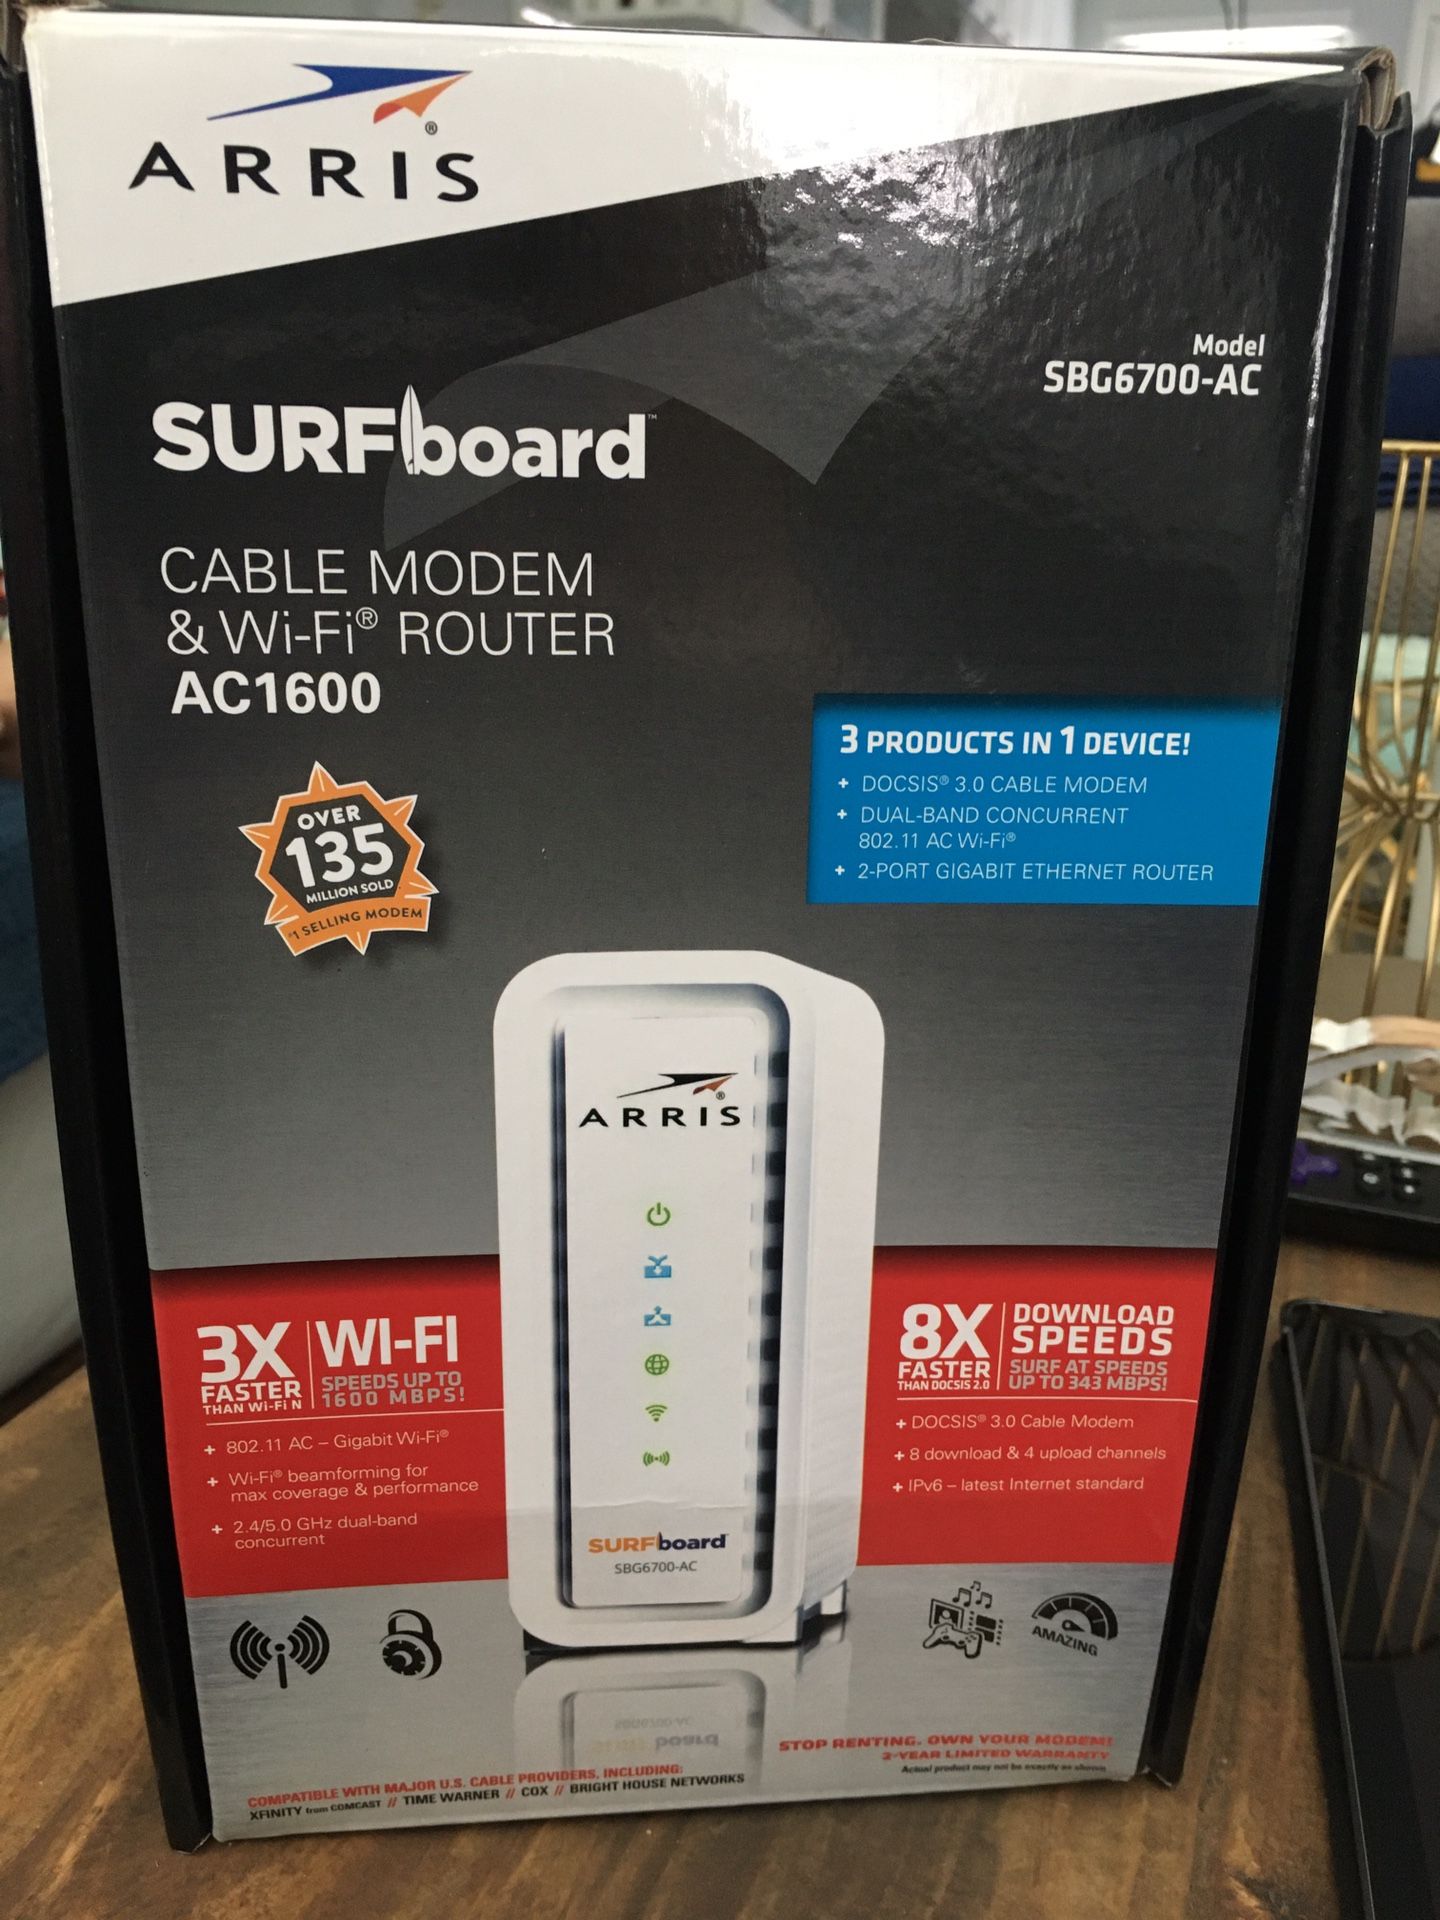 Arris Surfboard Cable Modem & WiFi Router AC 1600